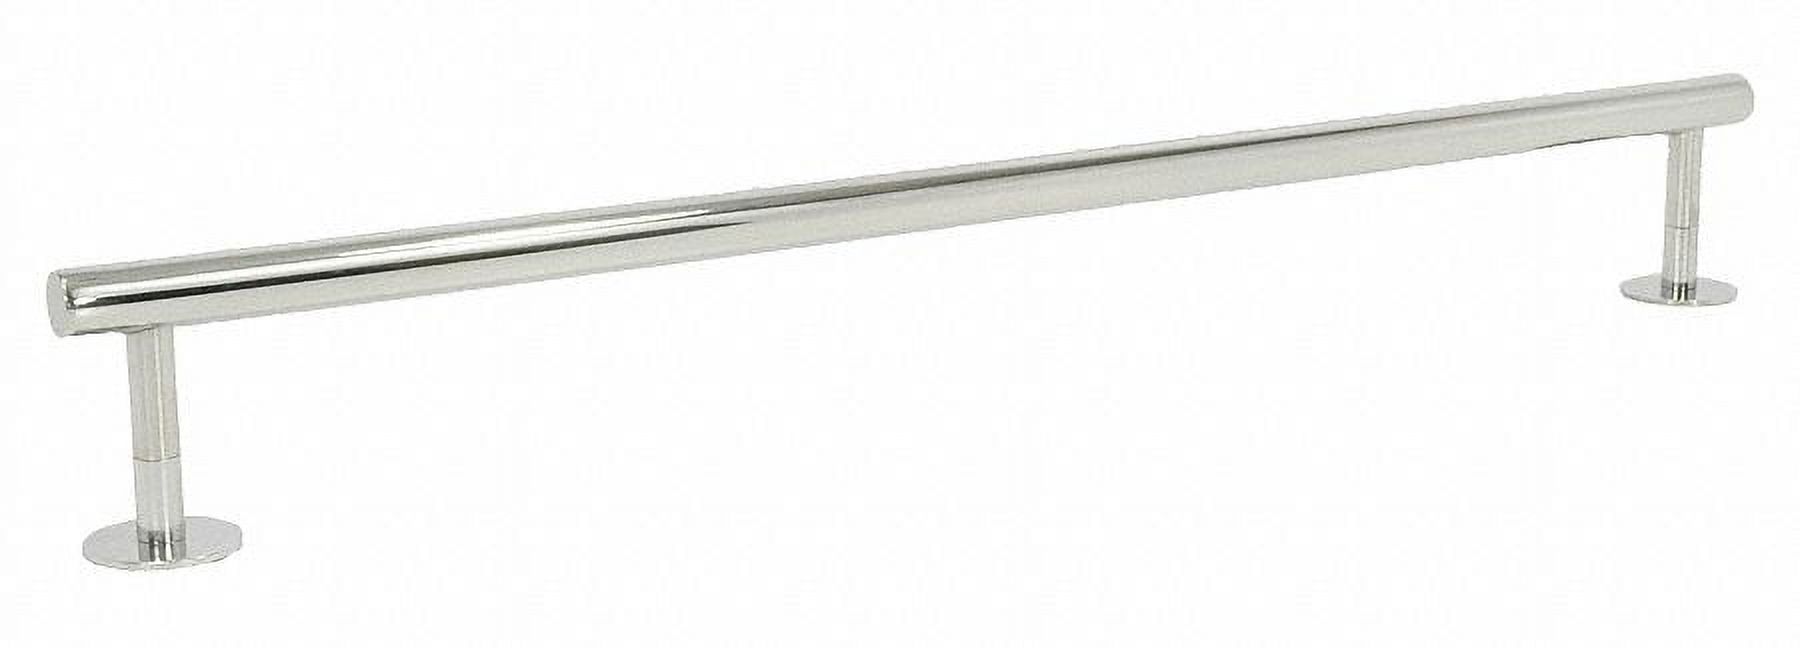 Wingits Towel Bar,SS,24 in Overall W  WMETBPS24 - image 1 of 1